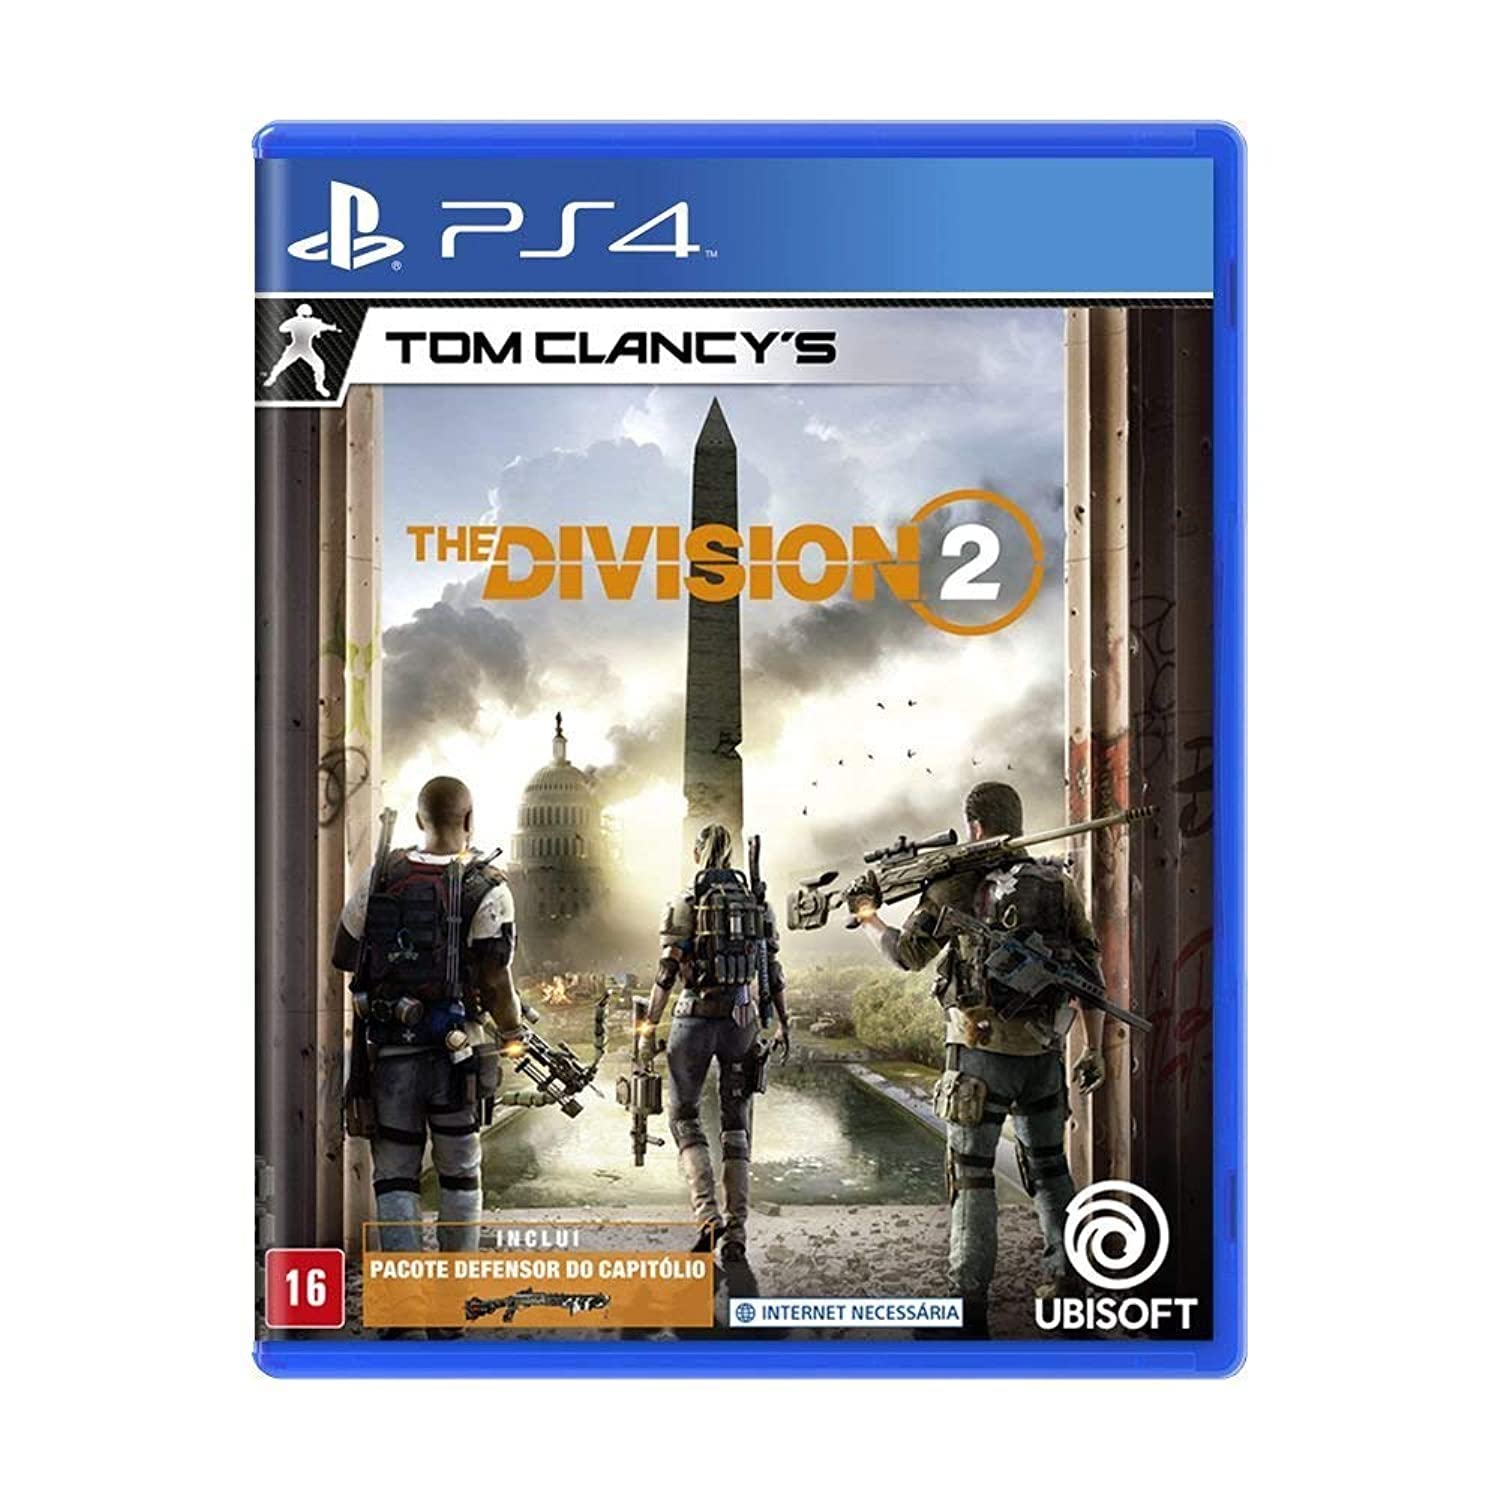 Tom Clancy's The Division 2 para Playstation 4